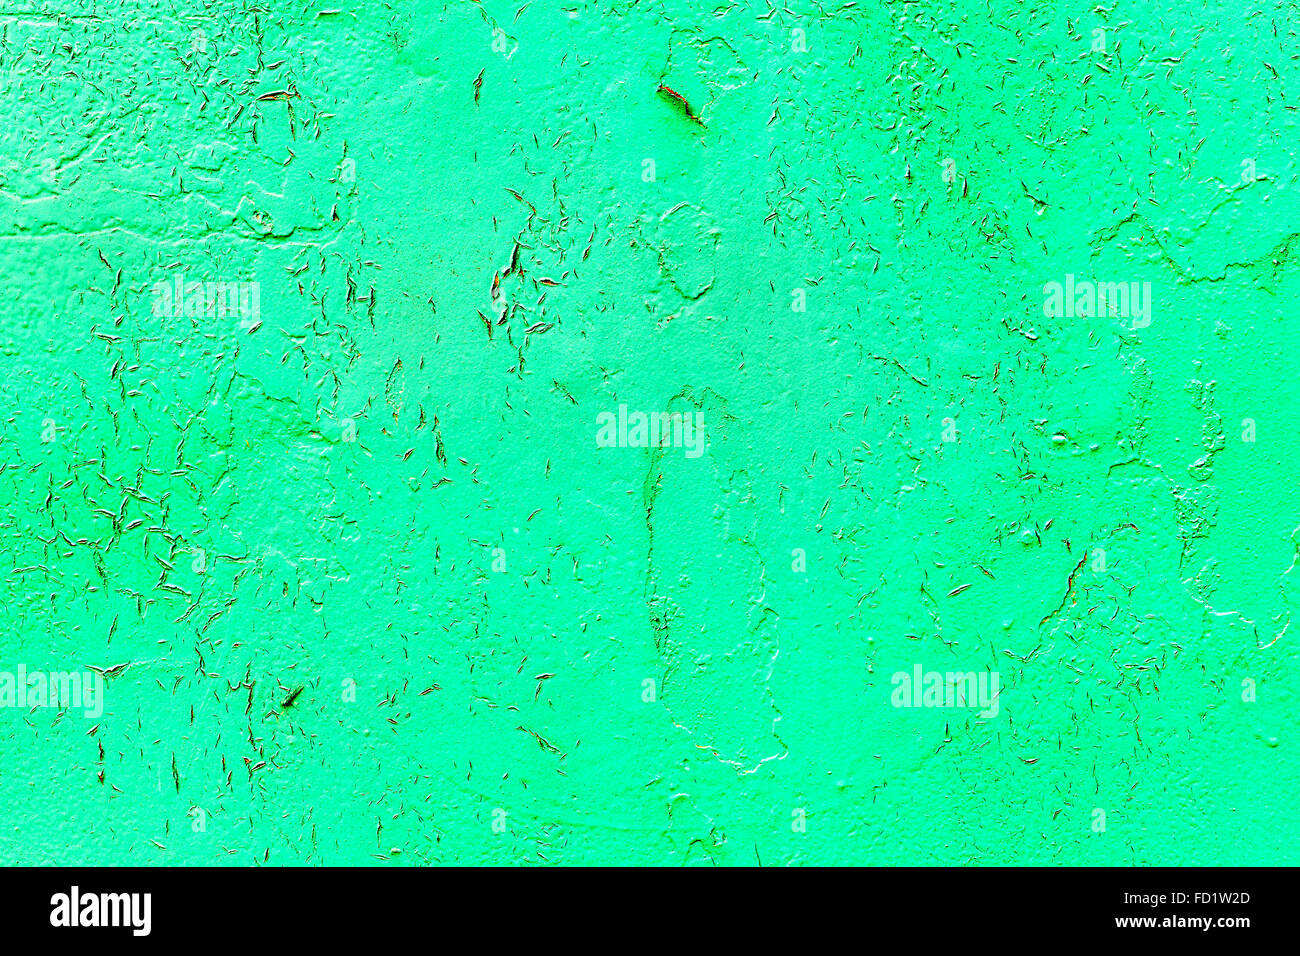 Vintage old damaged wall with cracks, scratches, painted with green paint. Textured background for your concept or project. Stock Photo